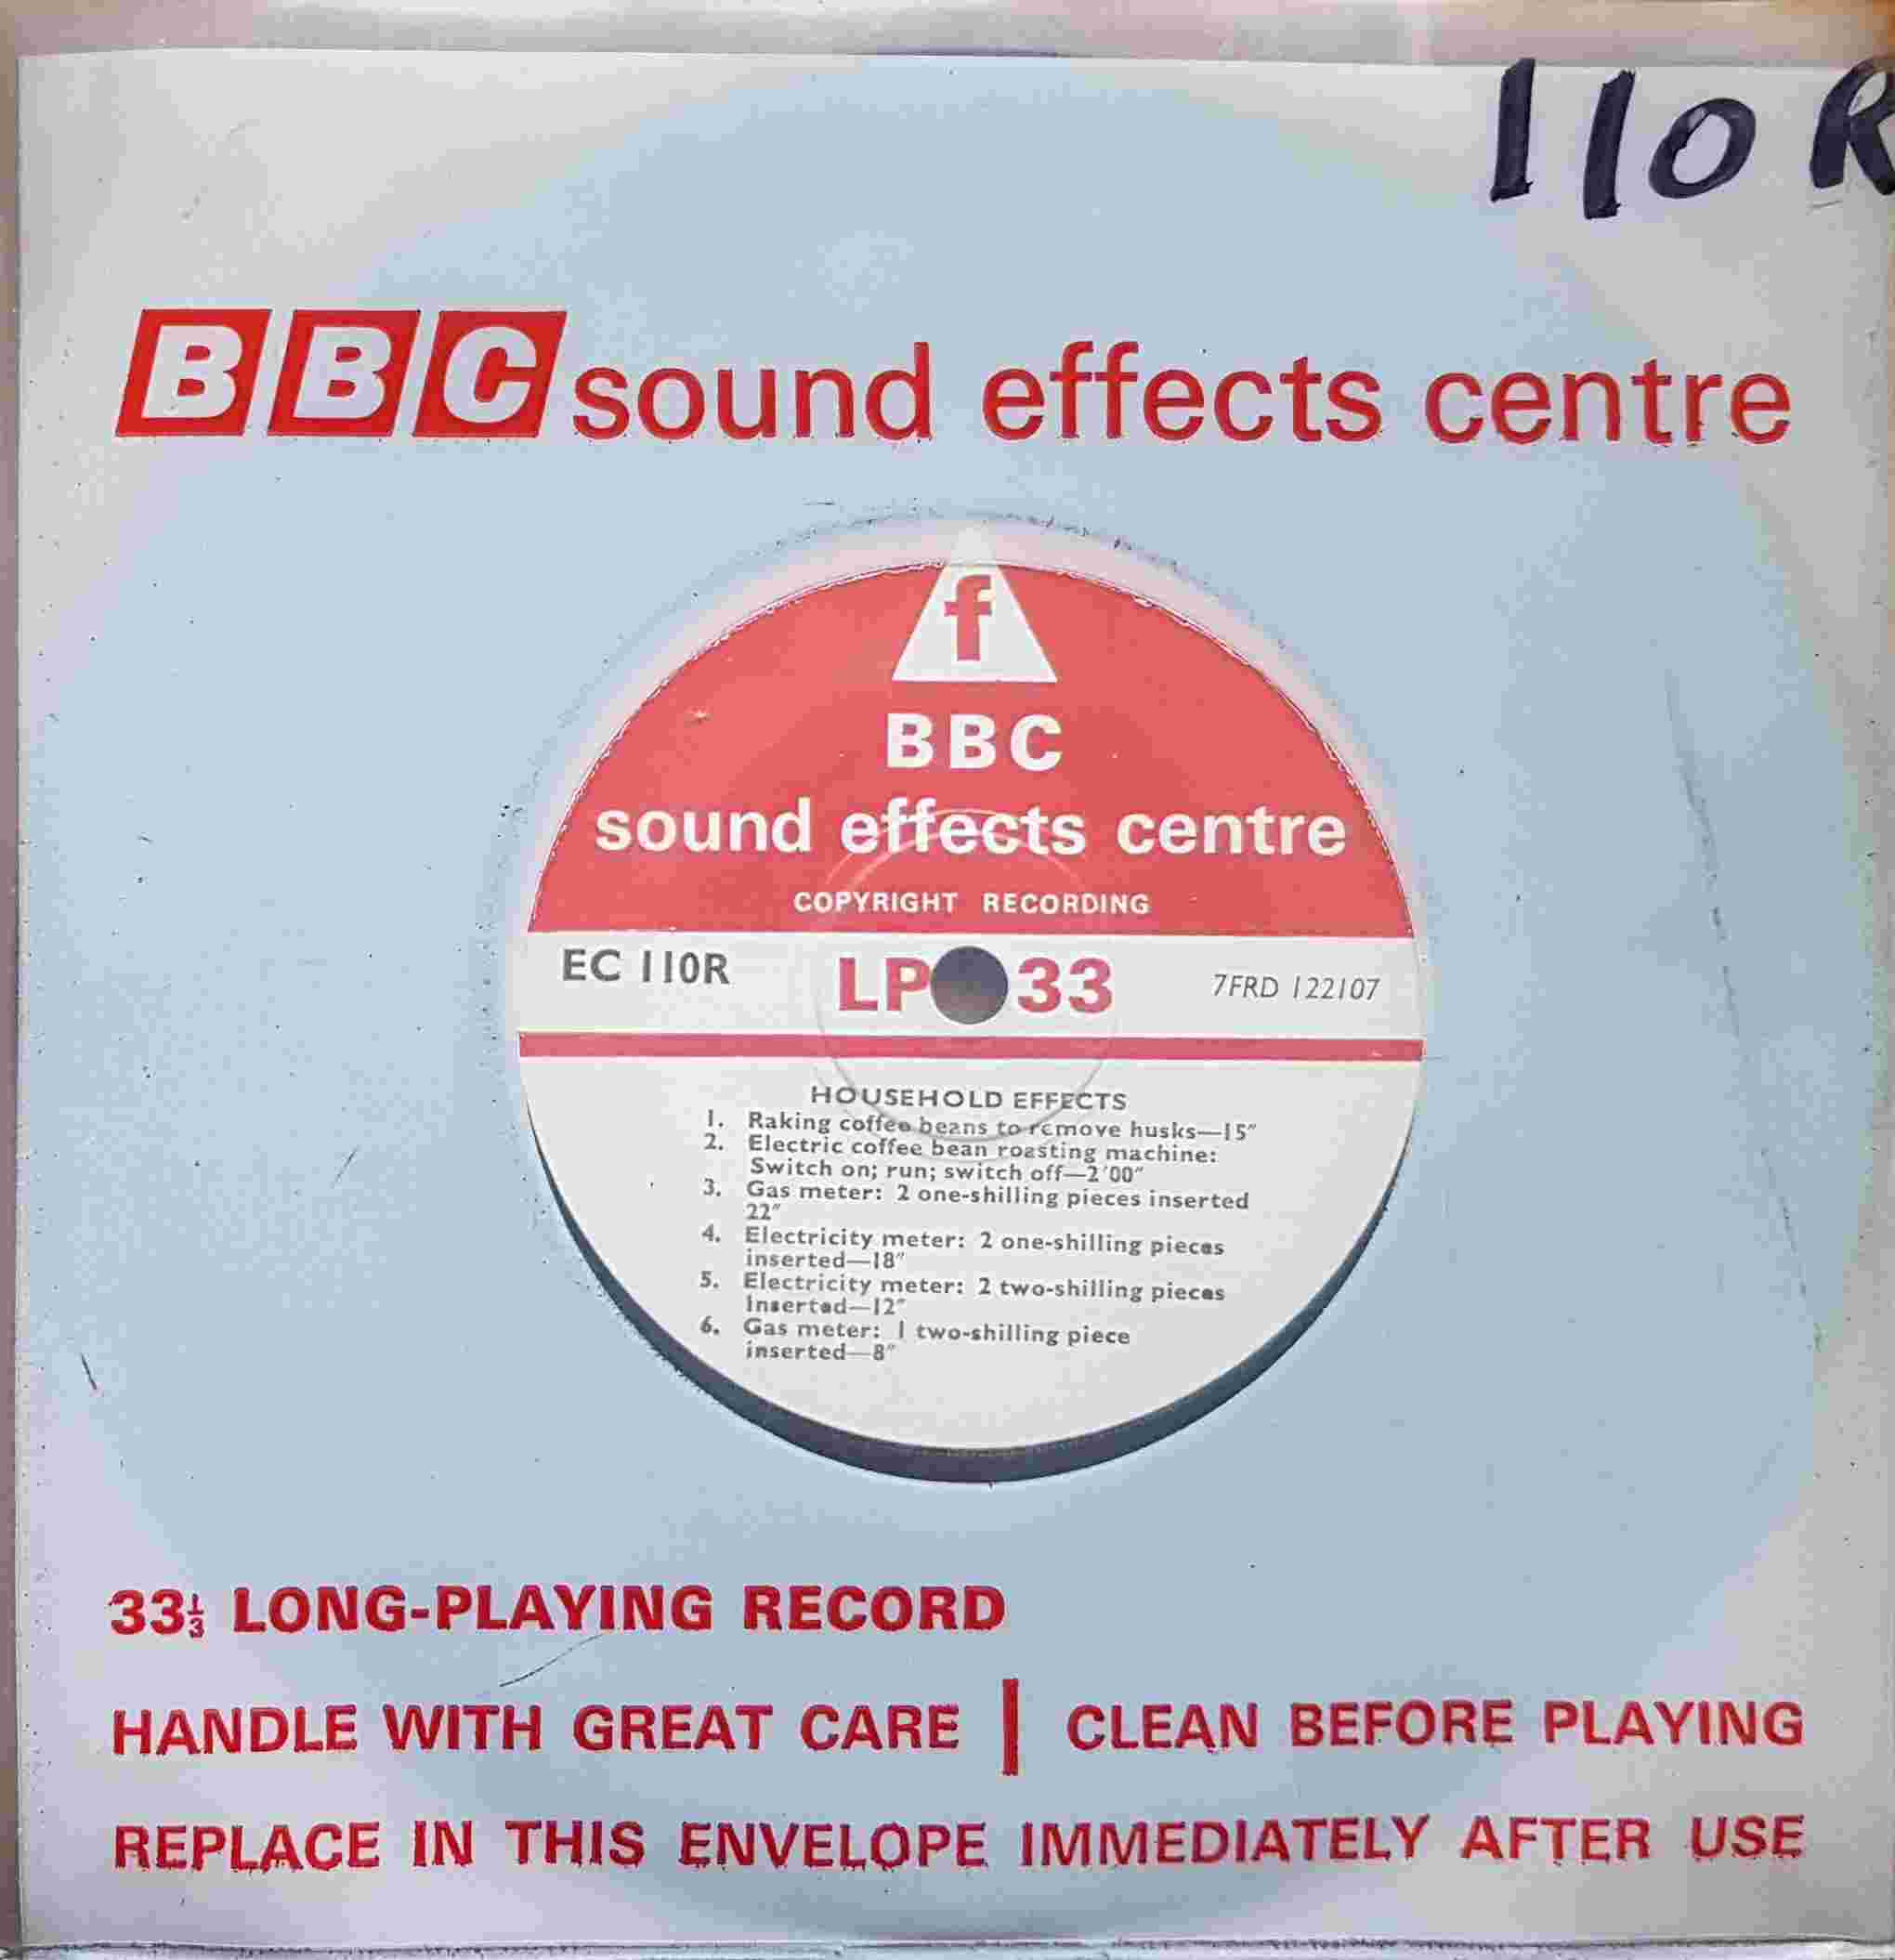 Picture of EC 110R Household effects by artist Not registered from the BBC records and Tapes library